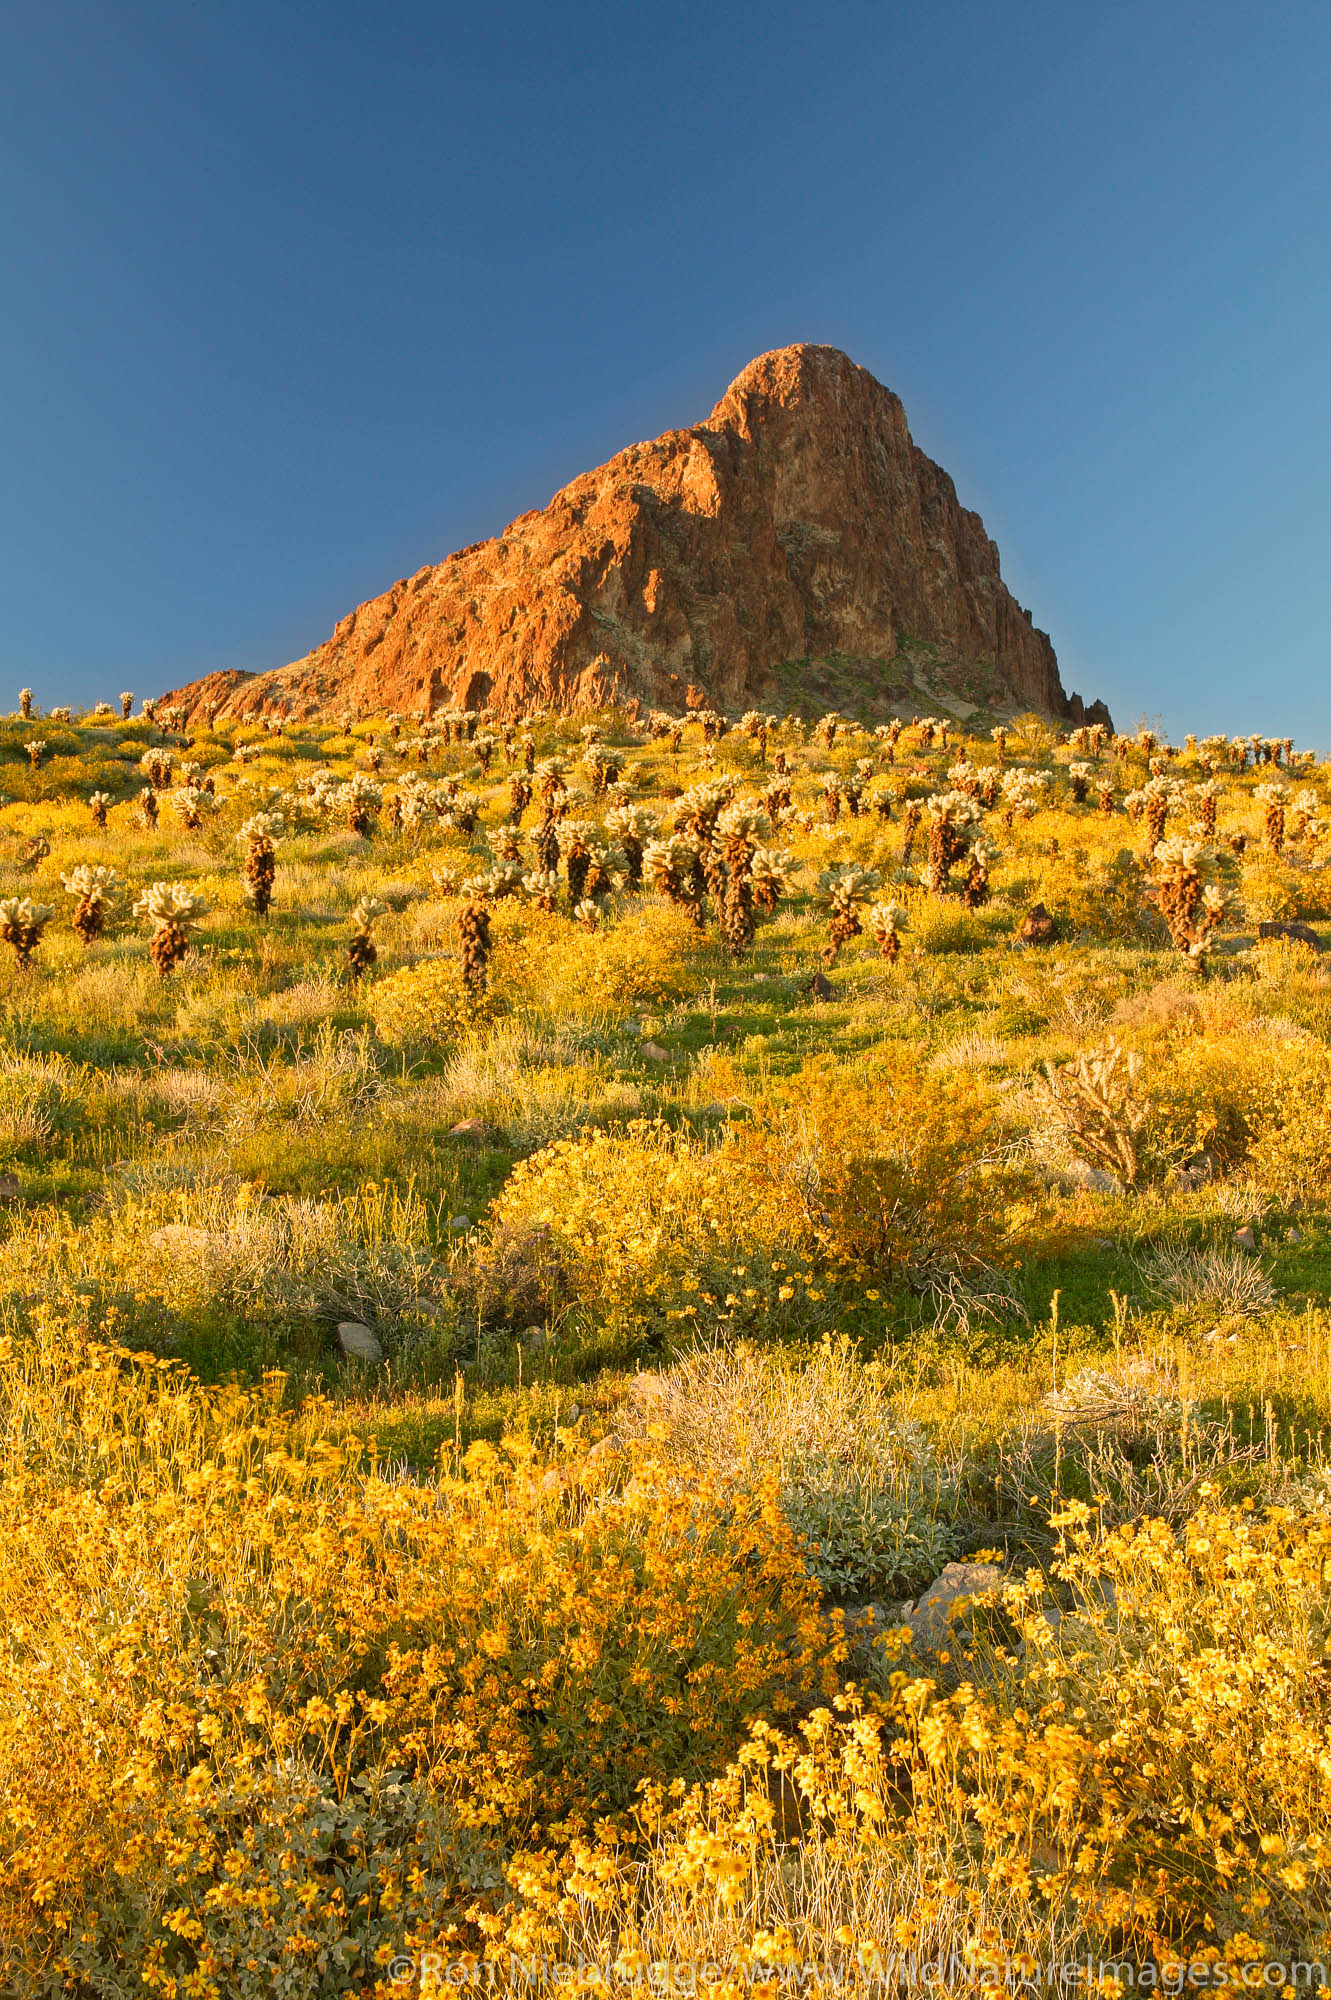 Boundry Cone in the Black Mountains with wildflowers including Brittlebush and Cholla cactus along Route 66, near Oatman, Arizona...